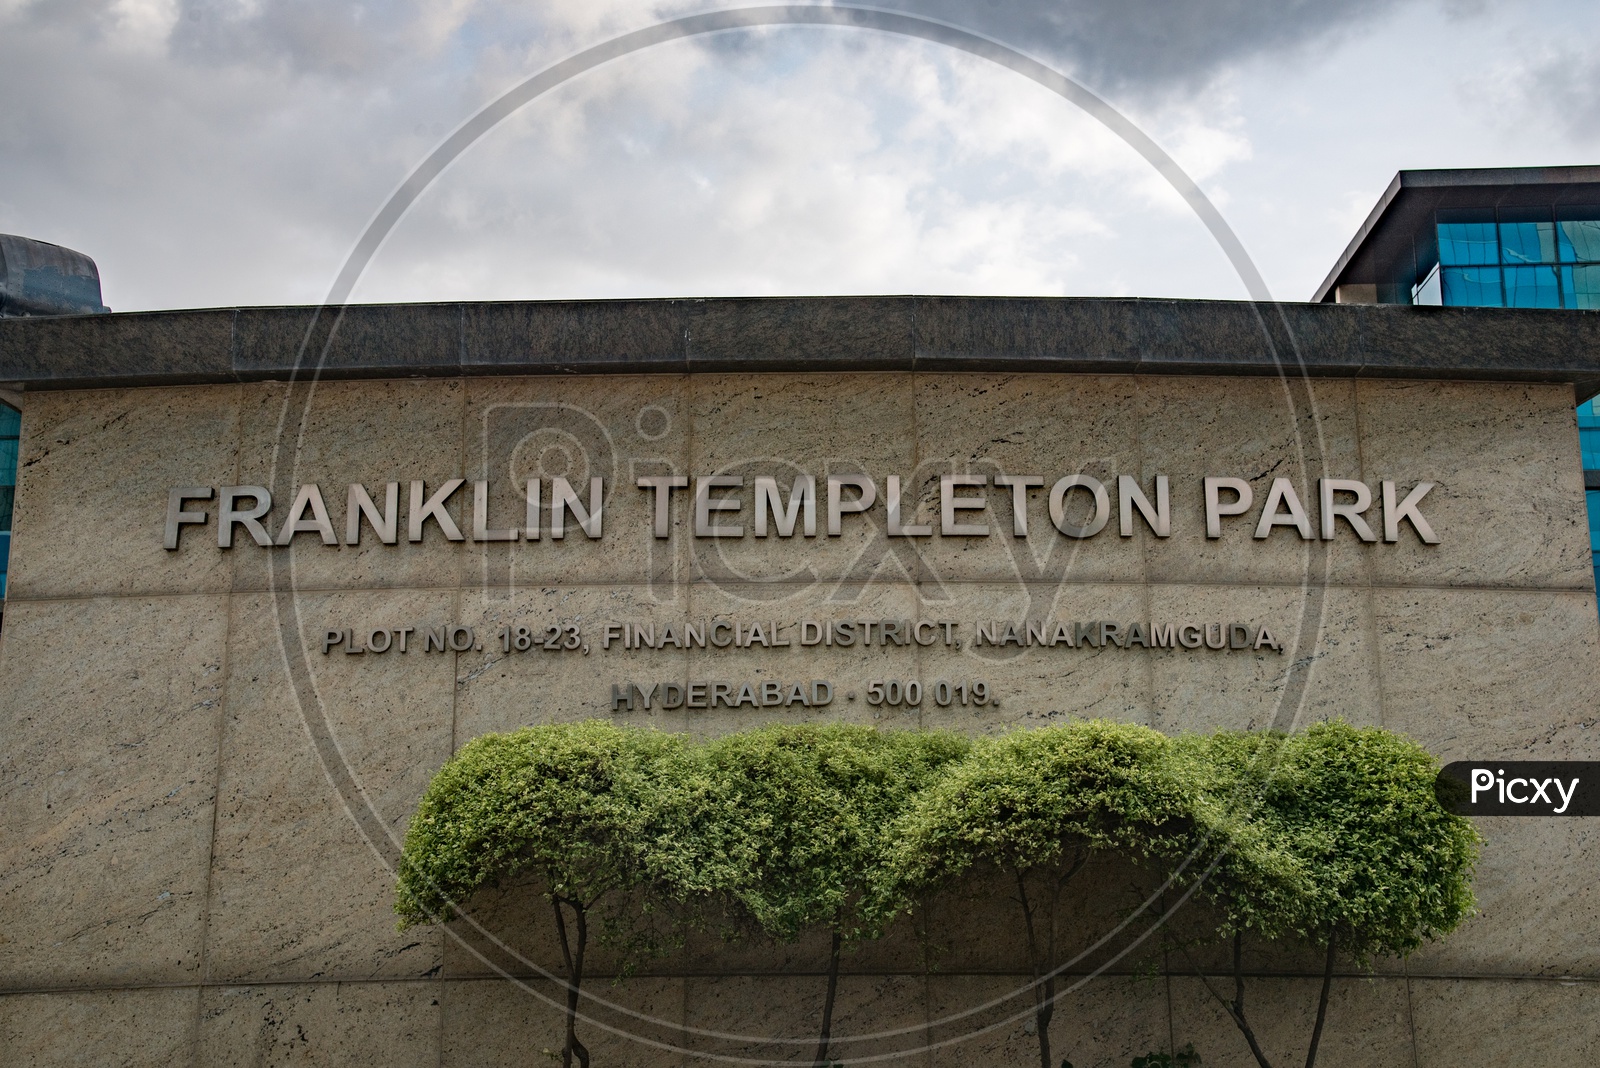 Franklin Templeton Investments Company